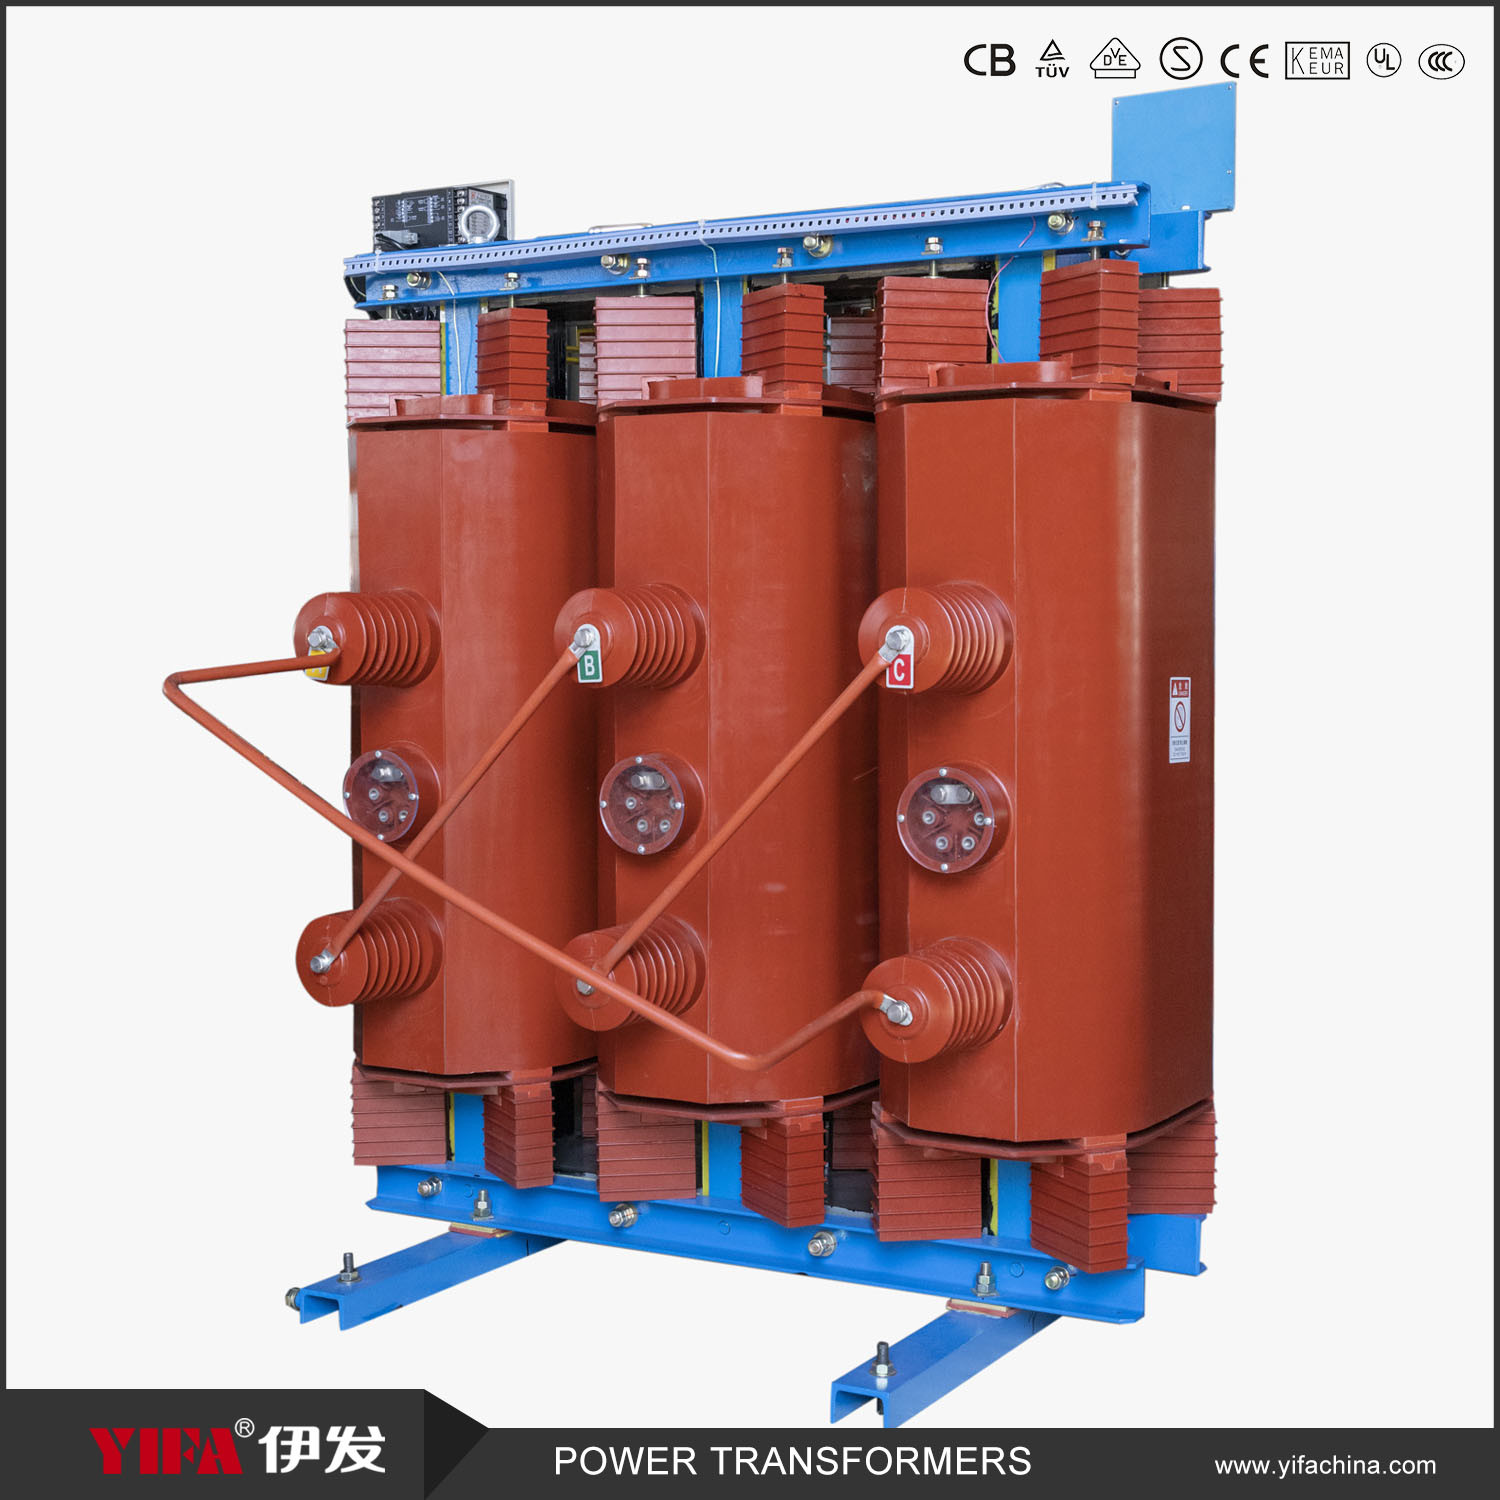 Find Quality Power and Dry Type Transformers from Chinese Manufacturers on Made-in-China.com